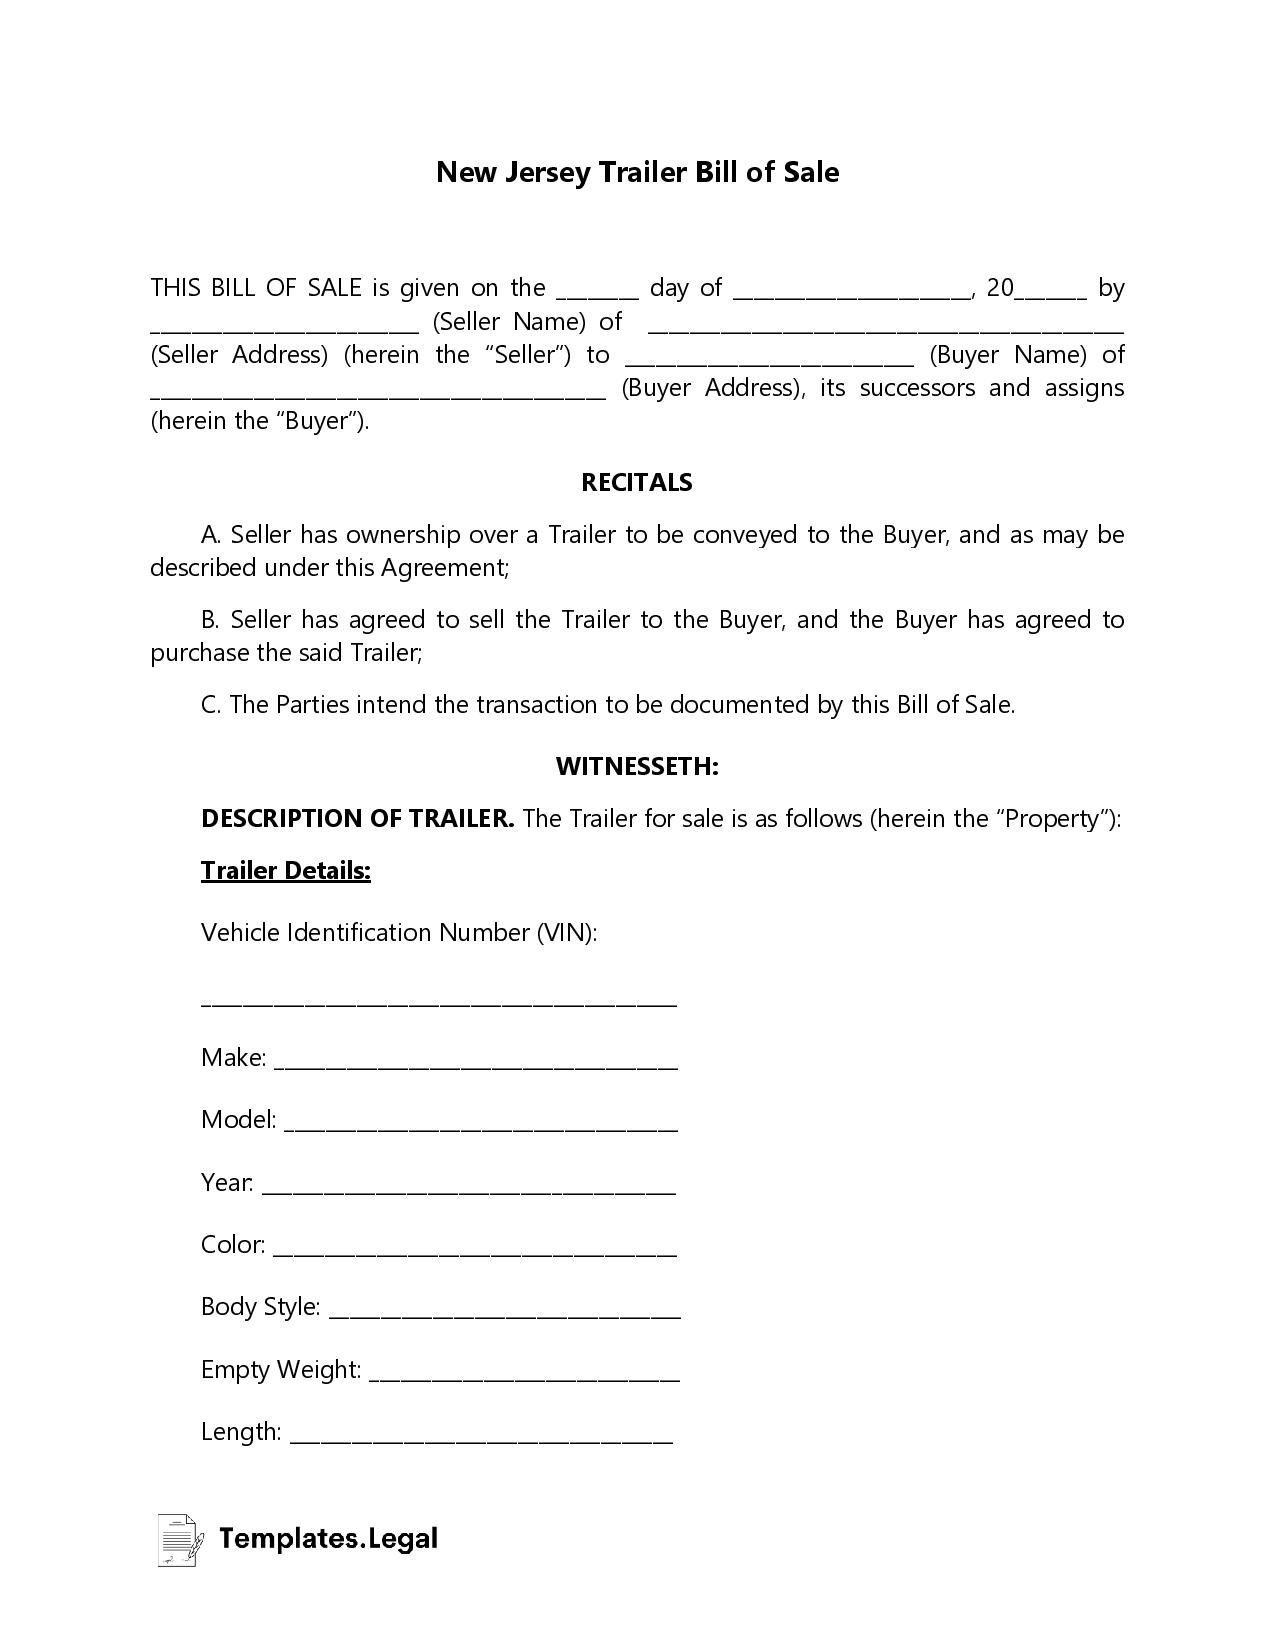 New Jersey Trailer Bill of Sale - Templates.Legal